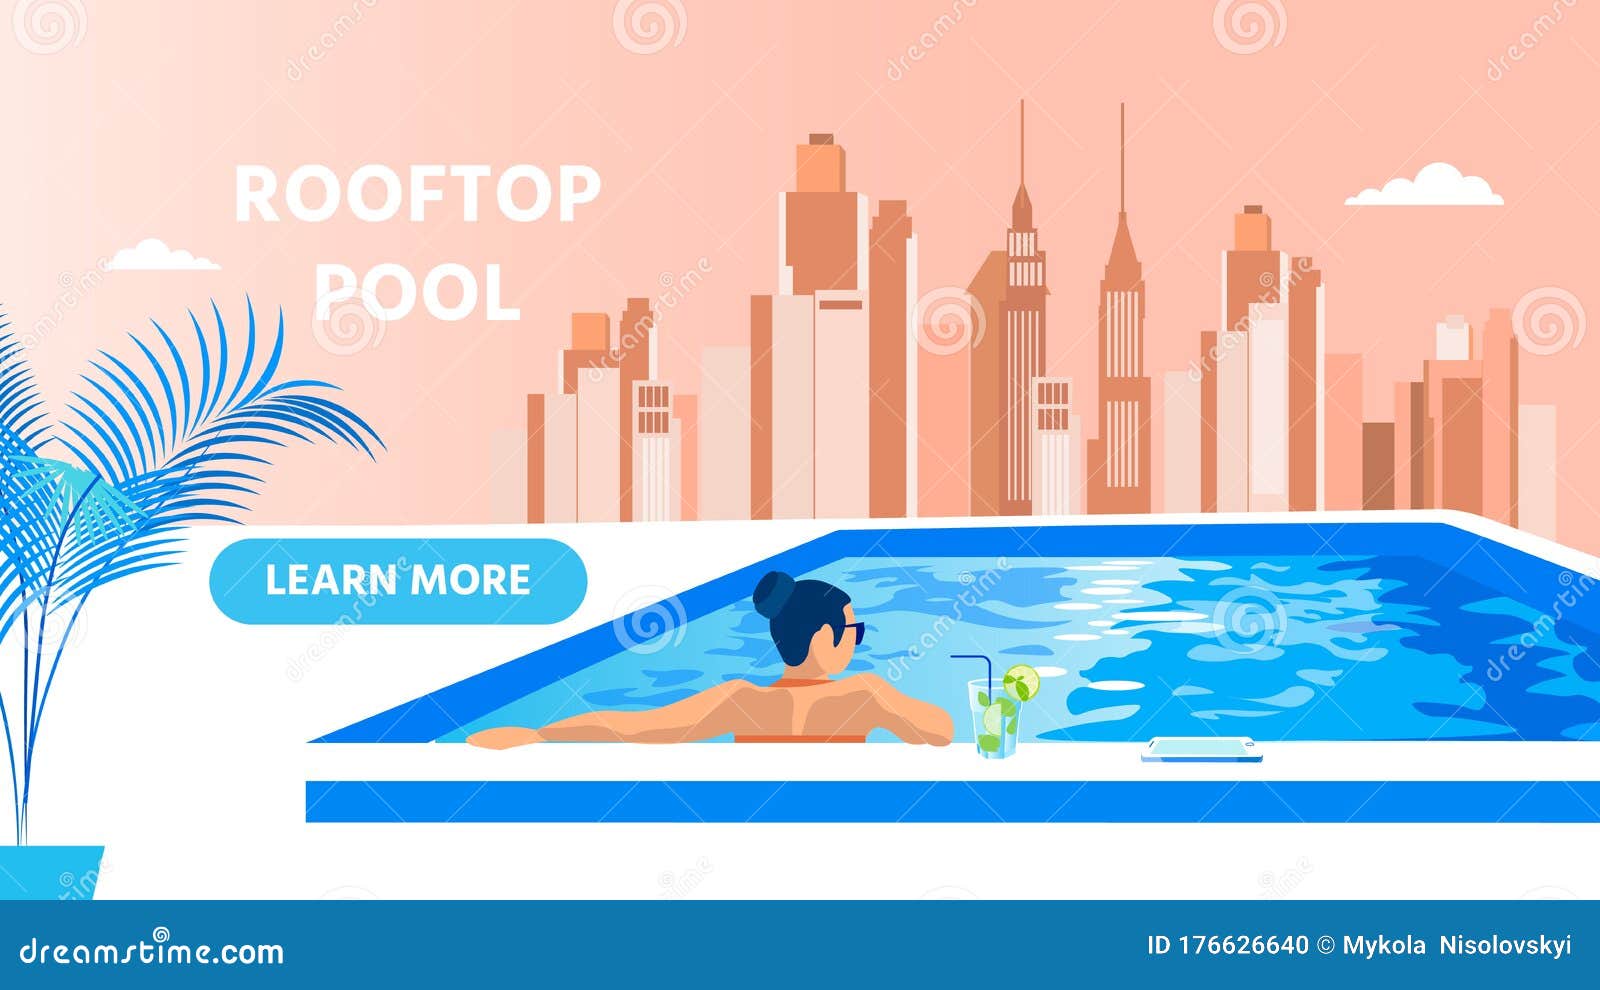 informative banner rooftop pool house summer relax